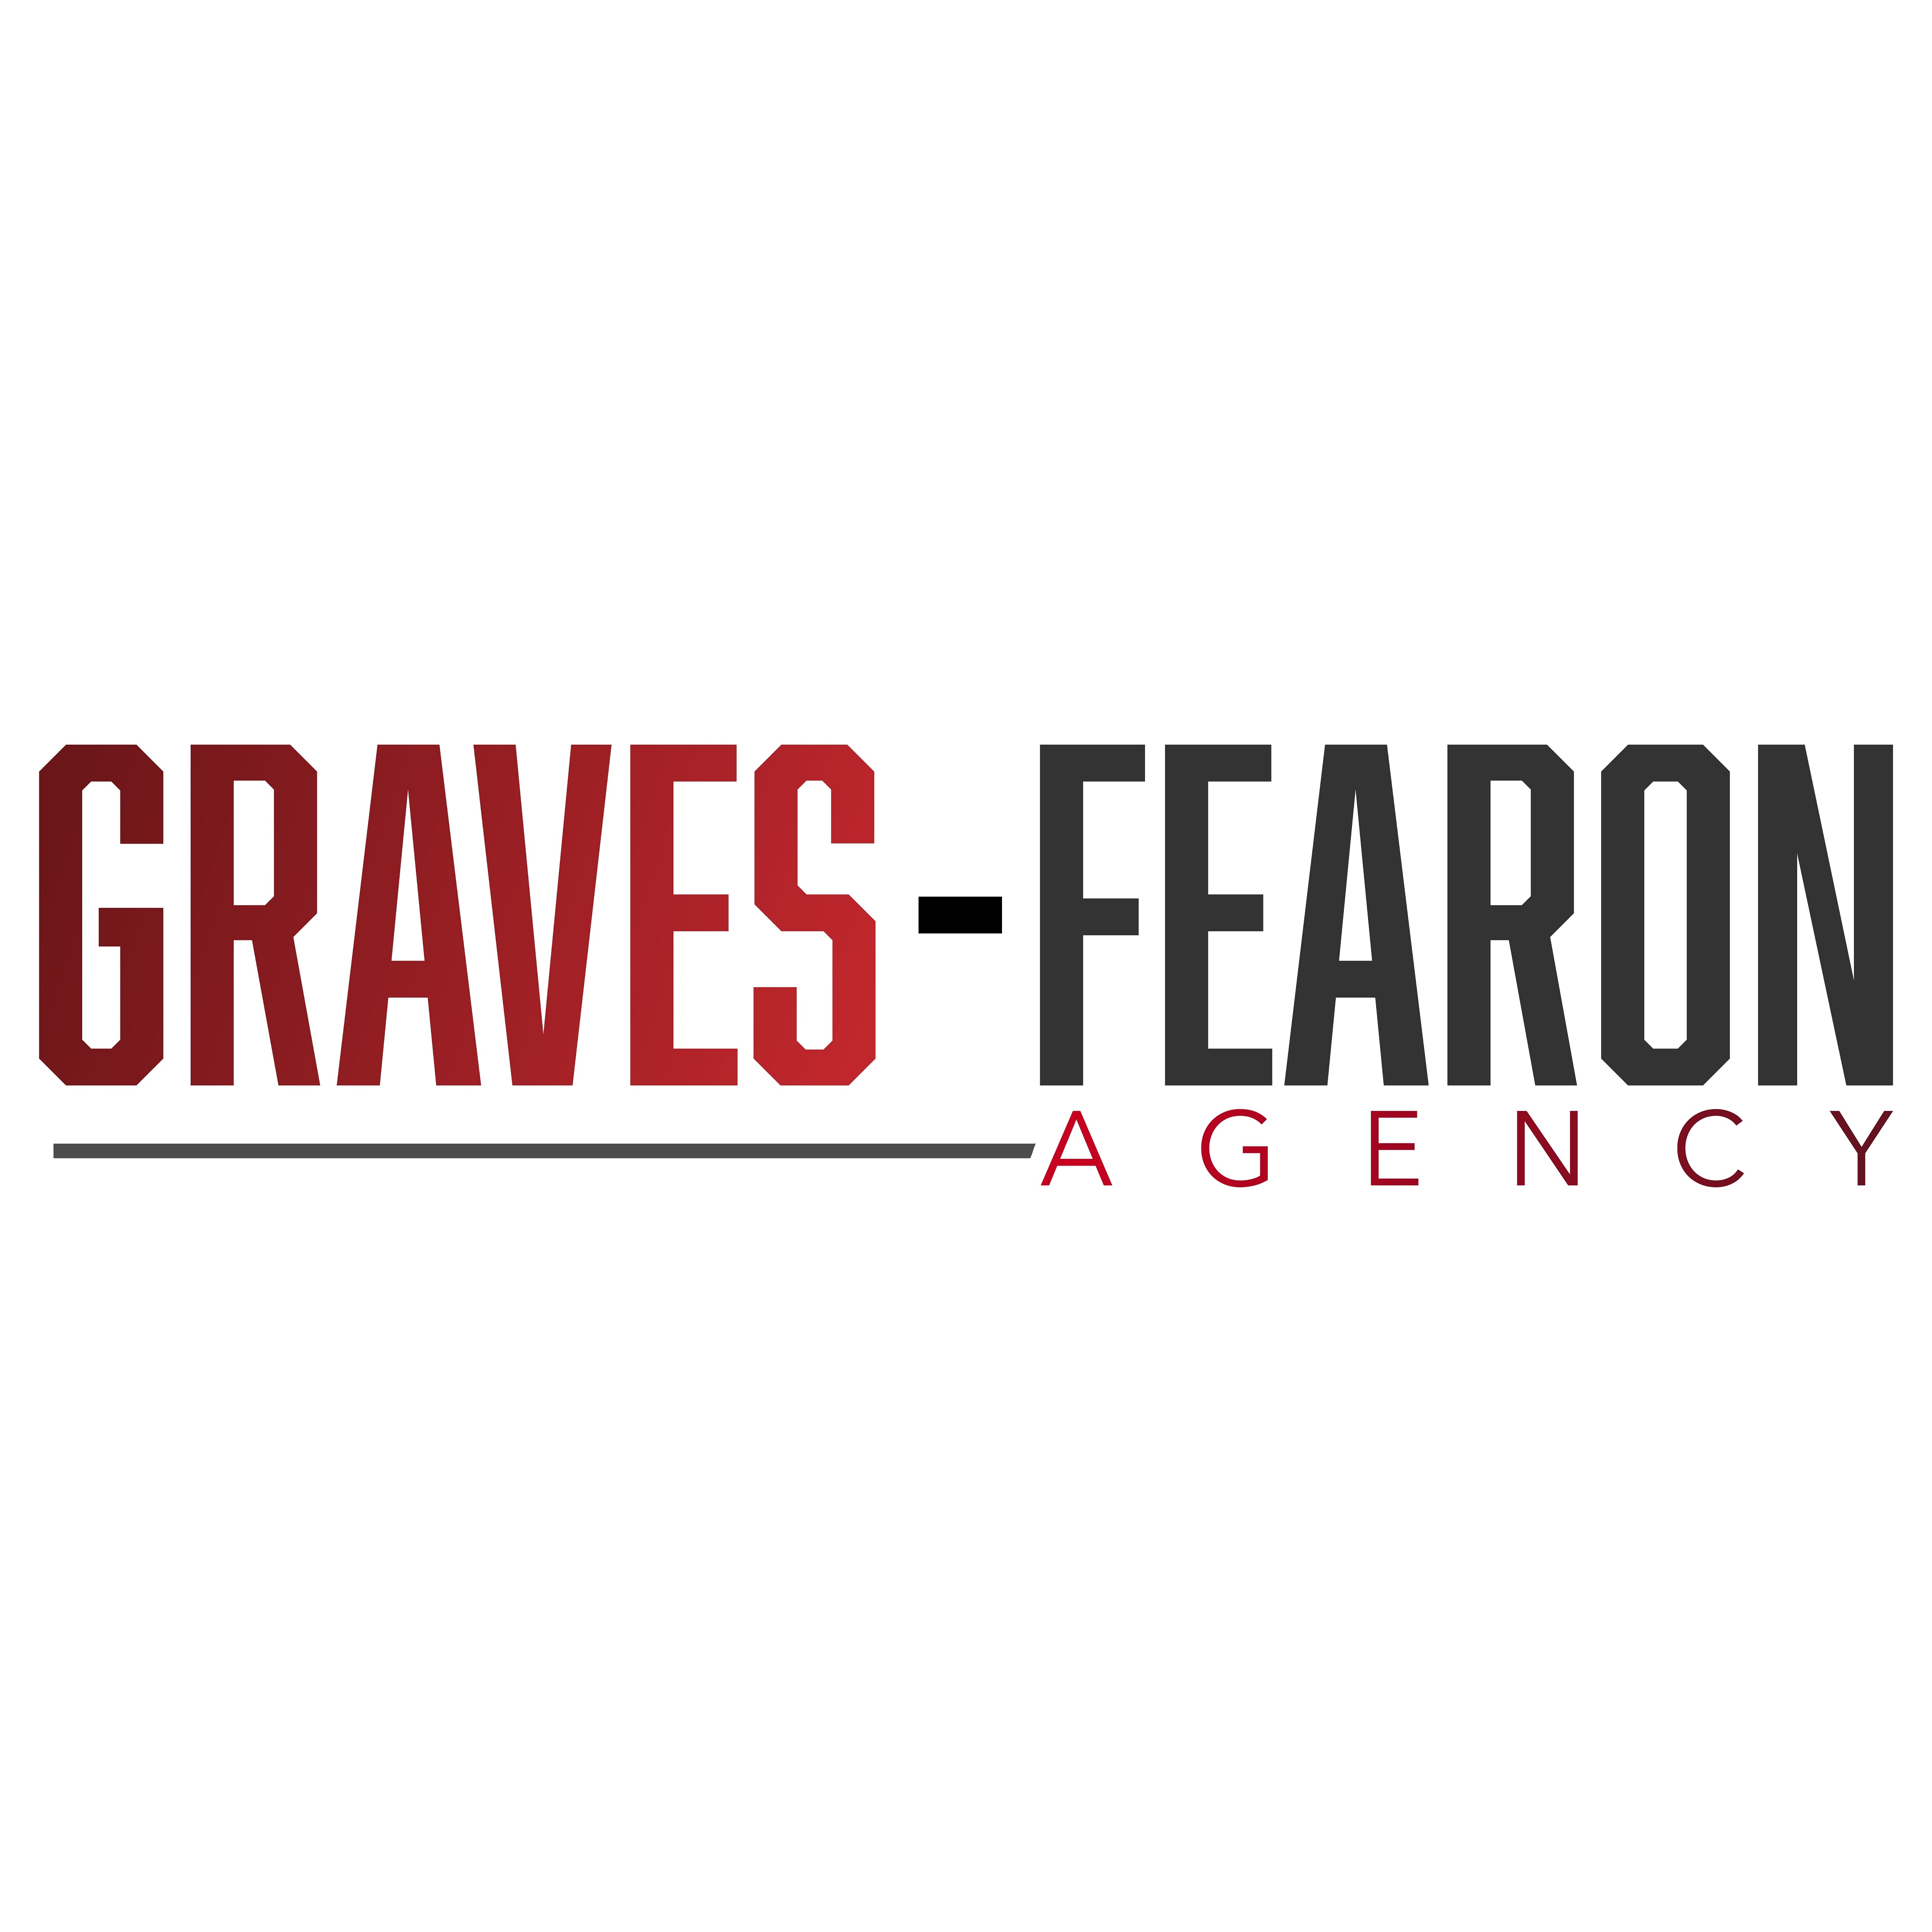 Nationwide Insurance: Graves-Fearon Agency LTD - Arcanum, OH 45304 - (937)692-5318 | ShowMeLocal.com